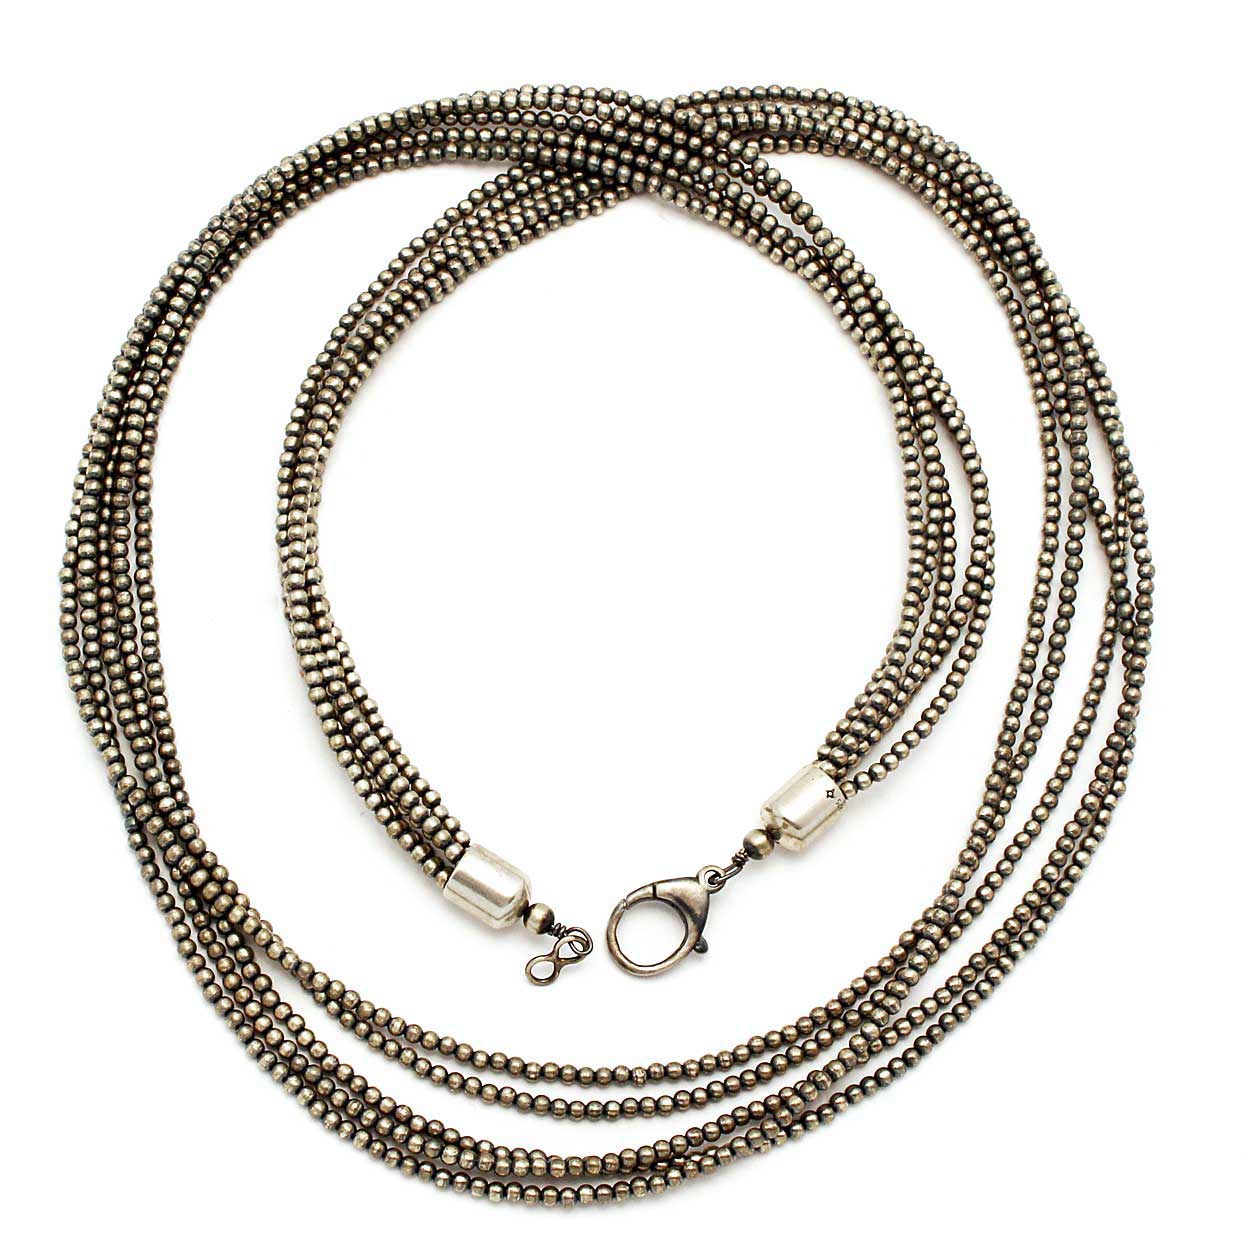 36" 2.5 MM Sterling Silver Bead Necklace by Touchine